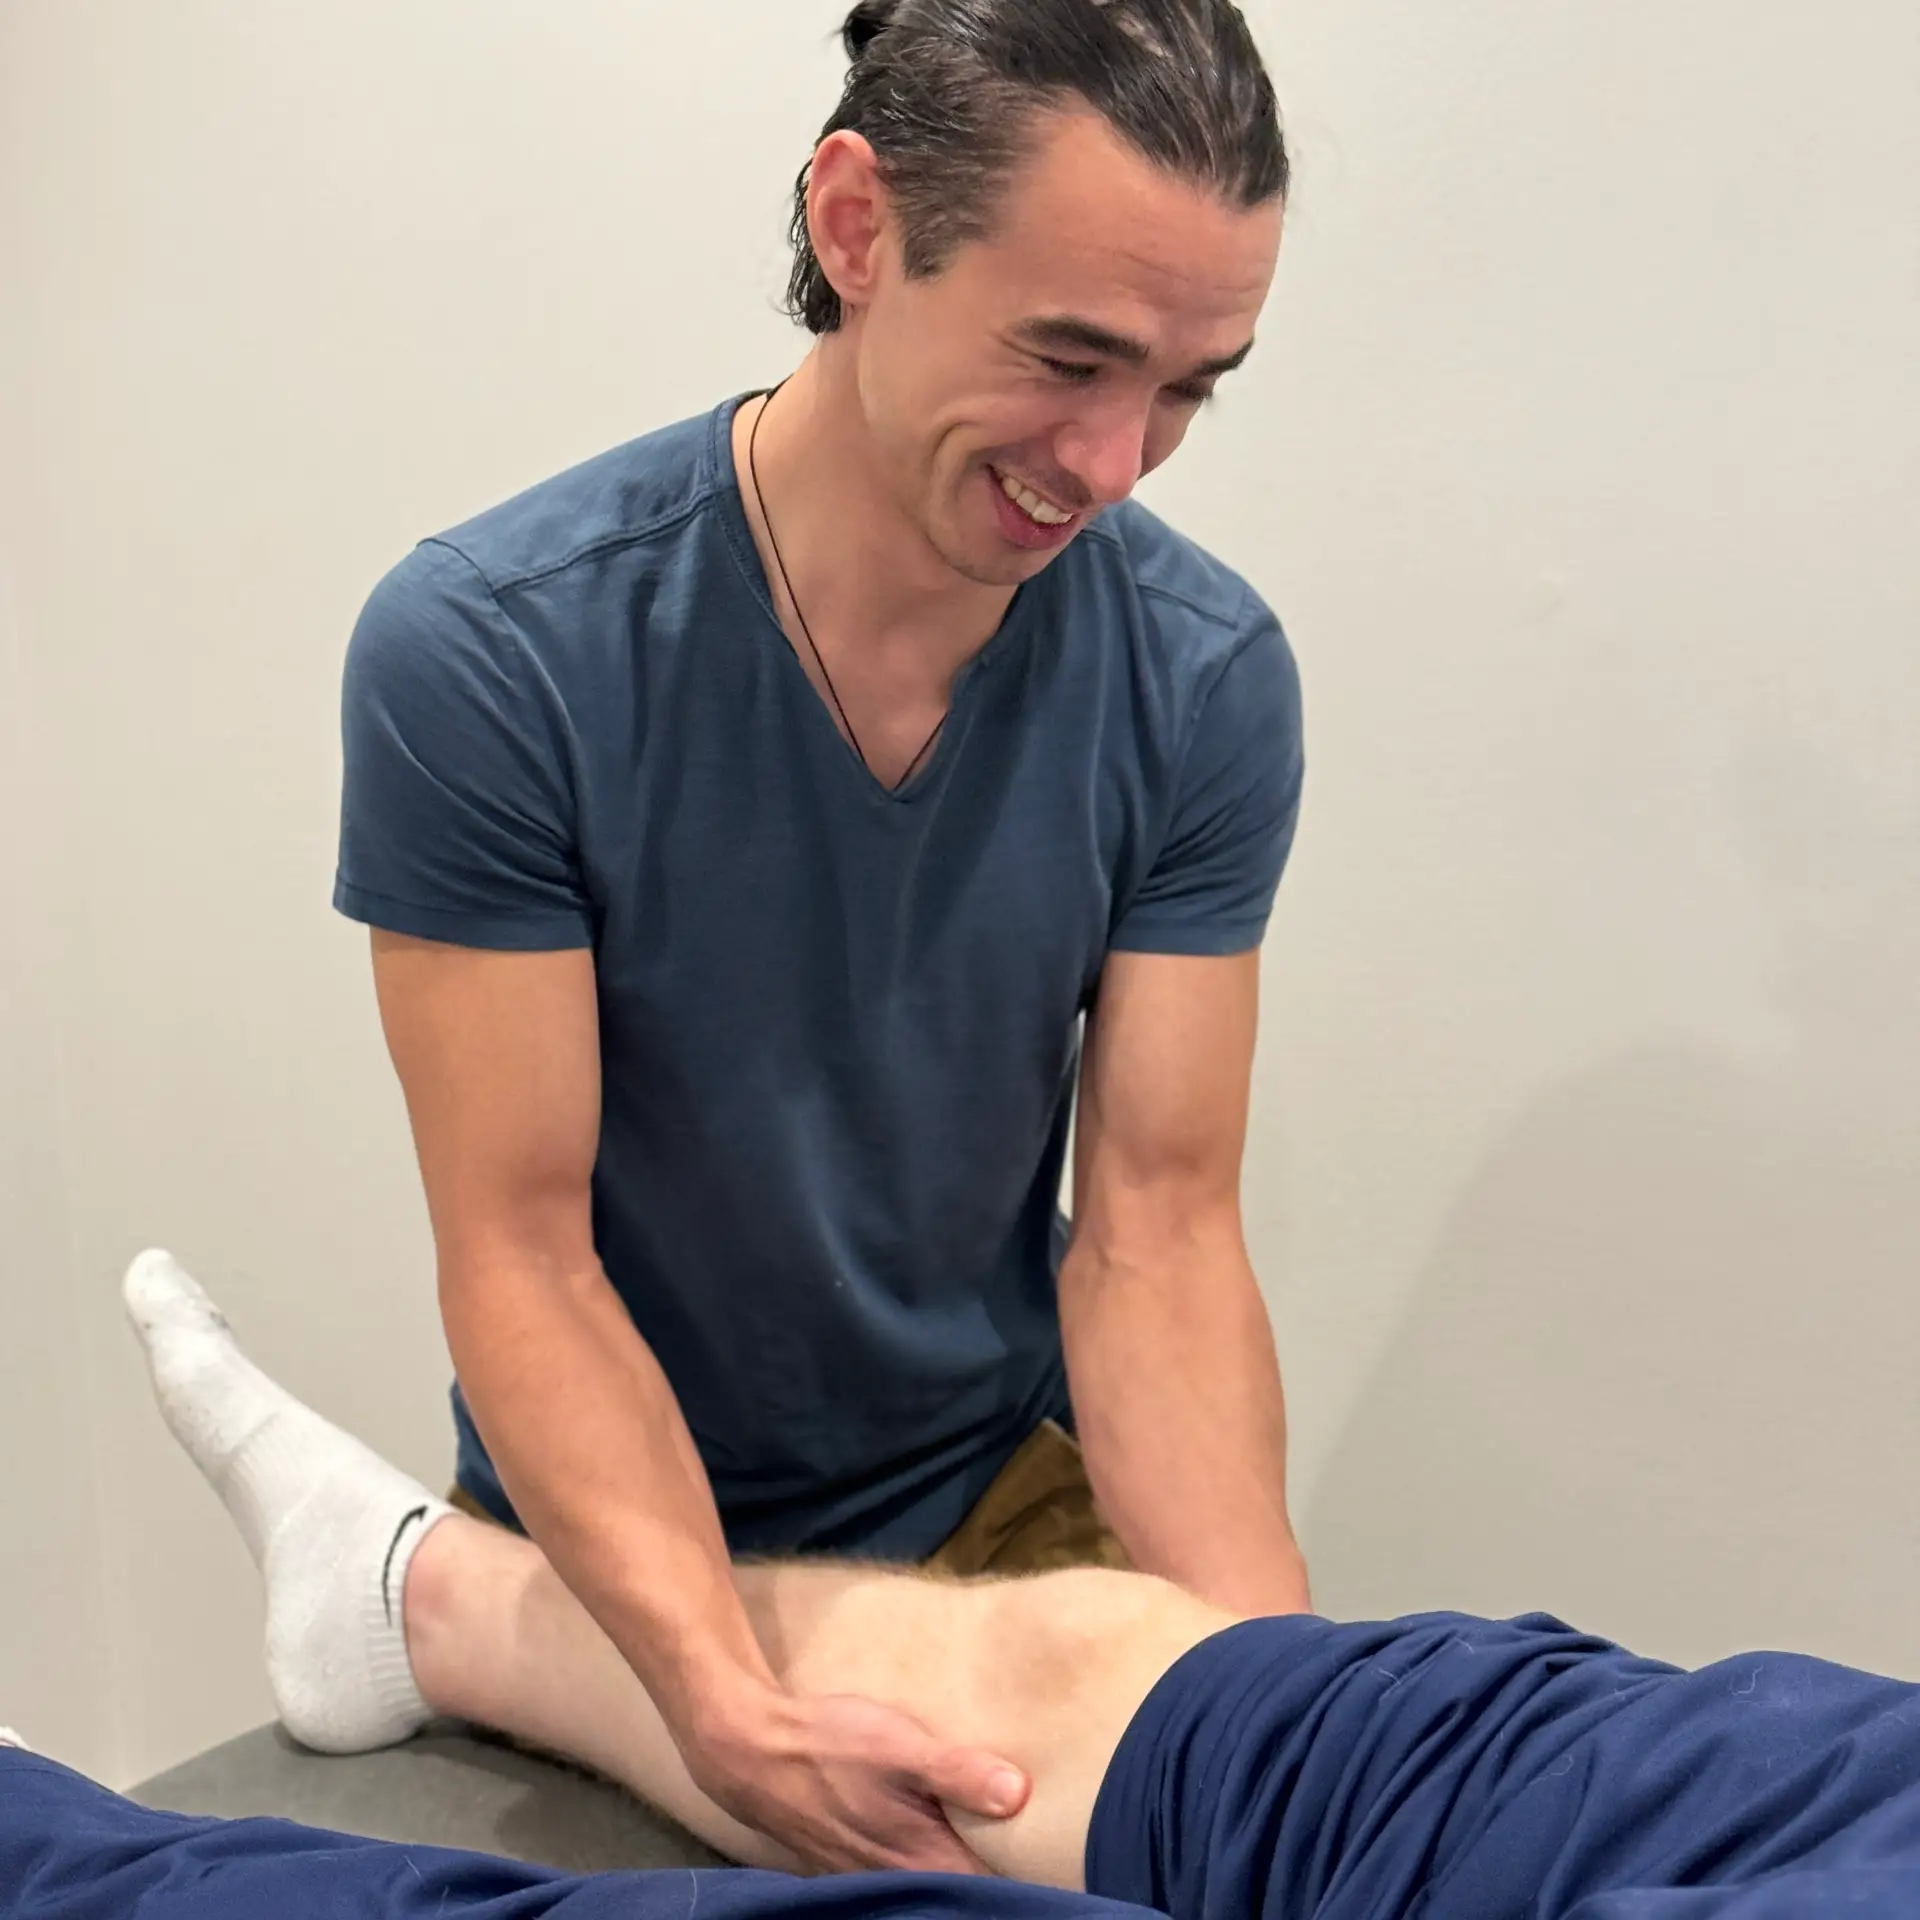 athletic therapy active recovery physiotherapy and hand clinic victoria bc 2